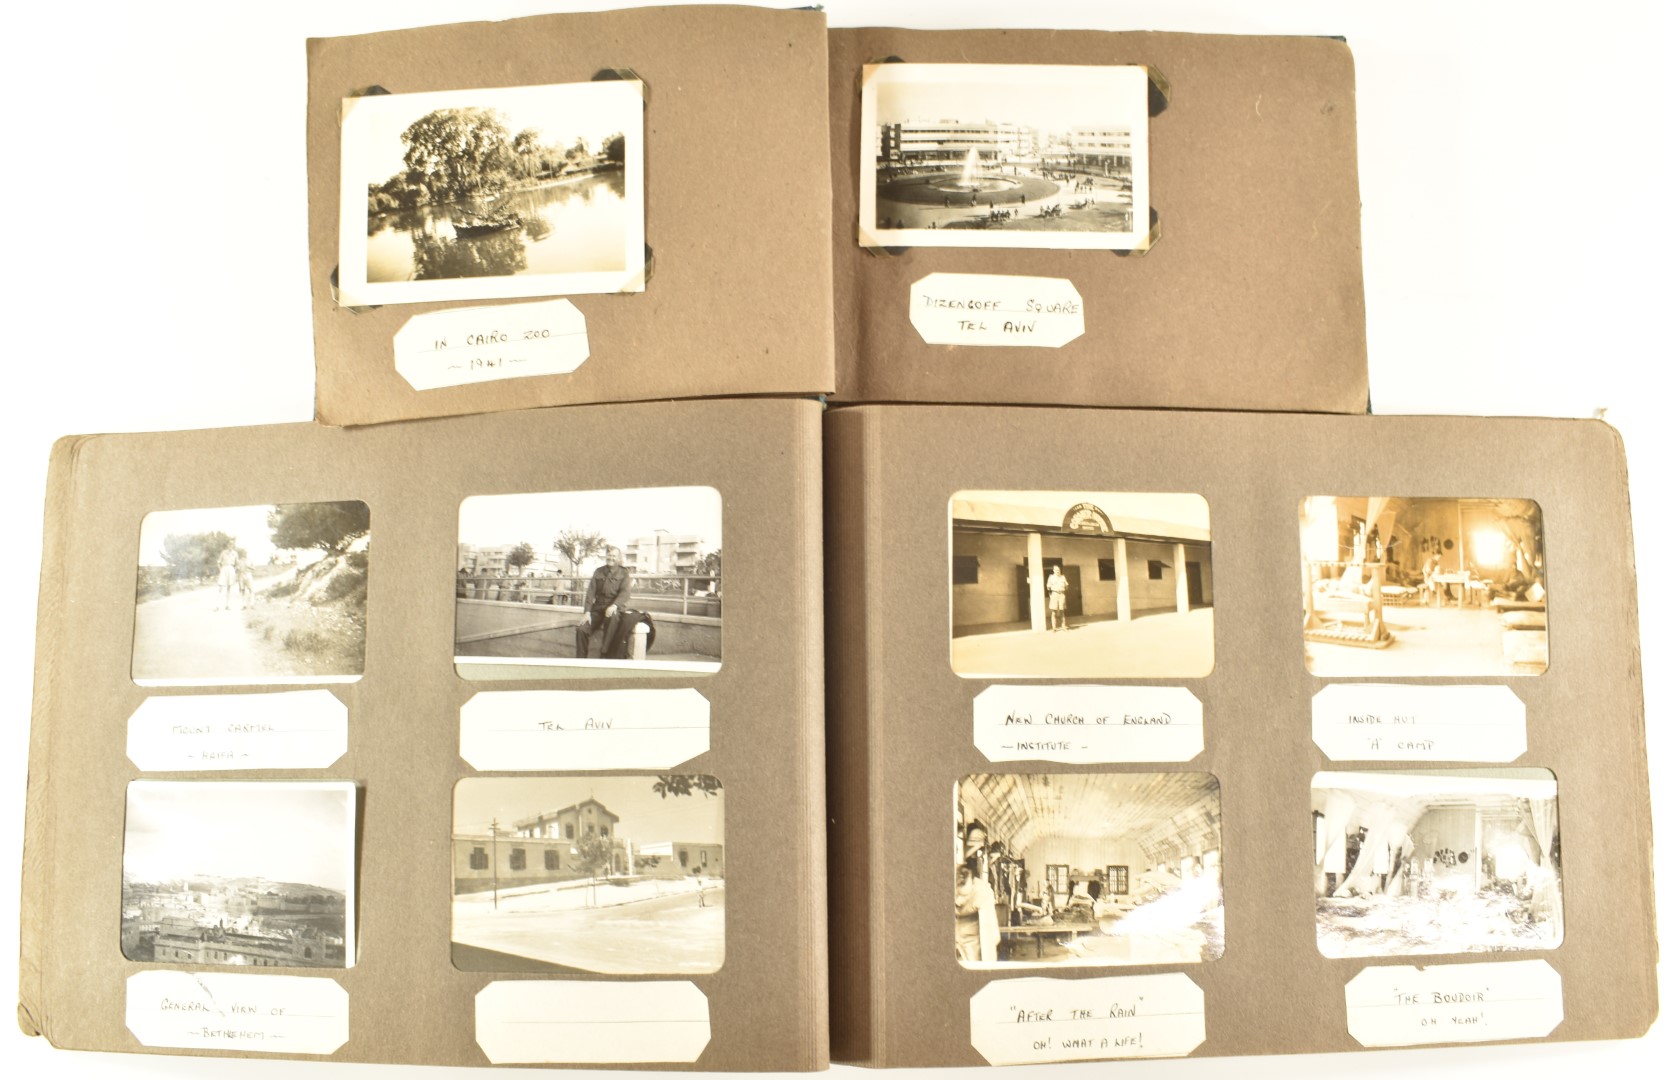 Two British Army WW2 tourist photo albums of Cairo and North Africa including Opera Square, the - Image 4 of 9